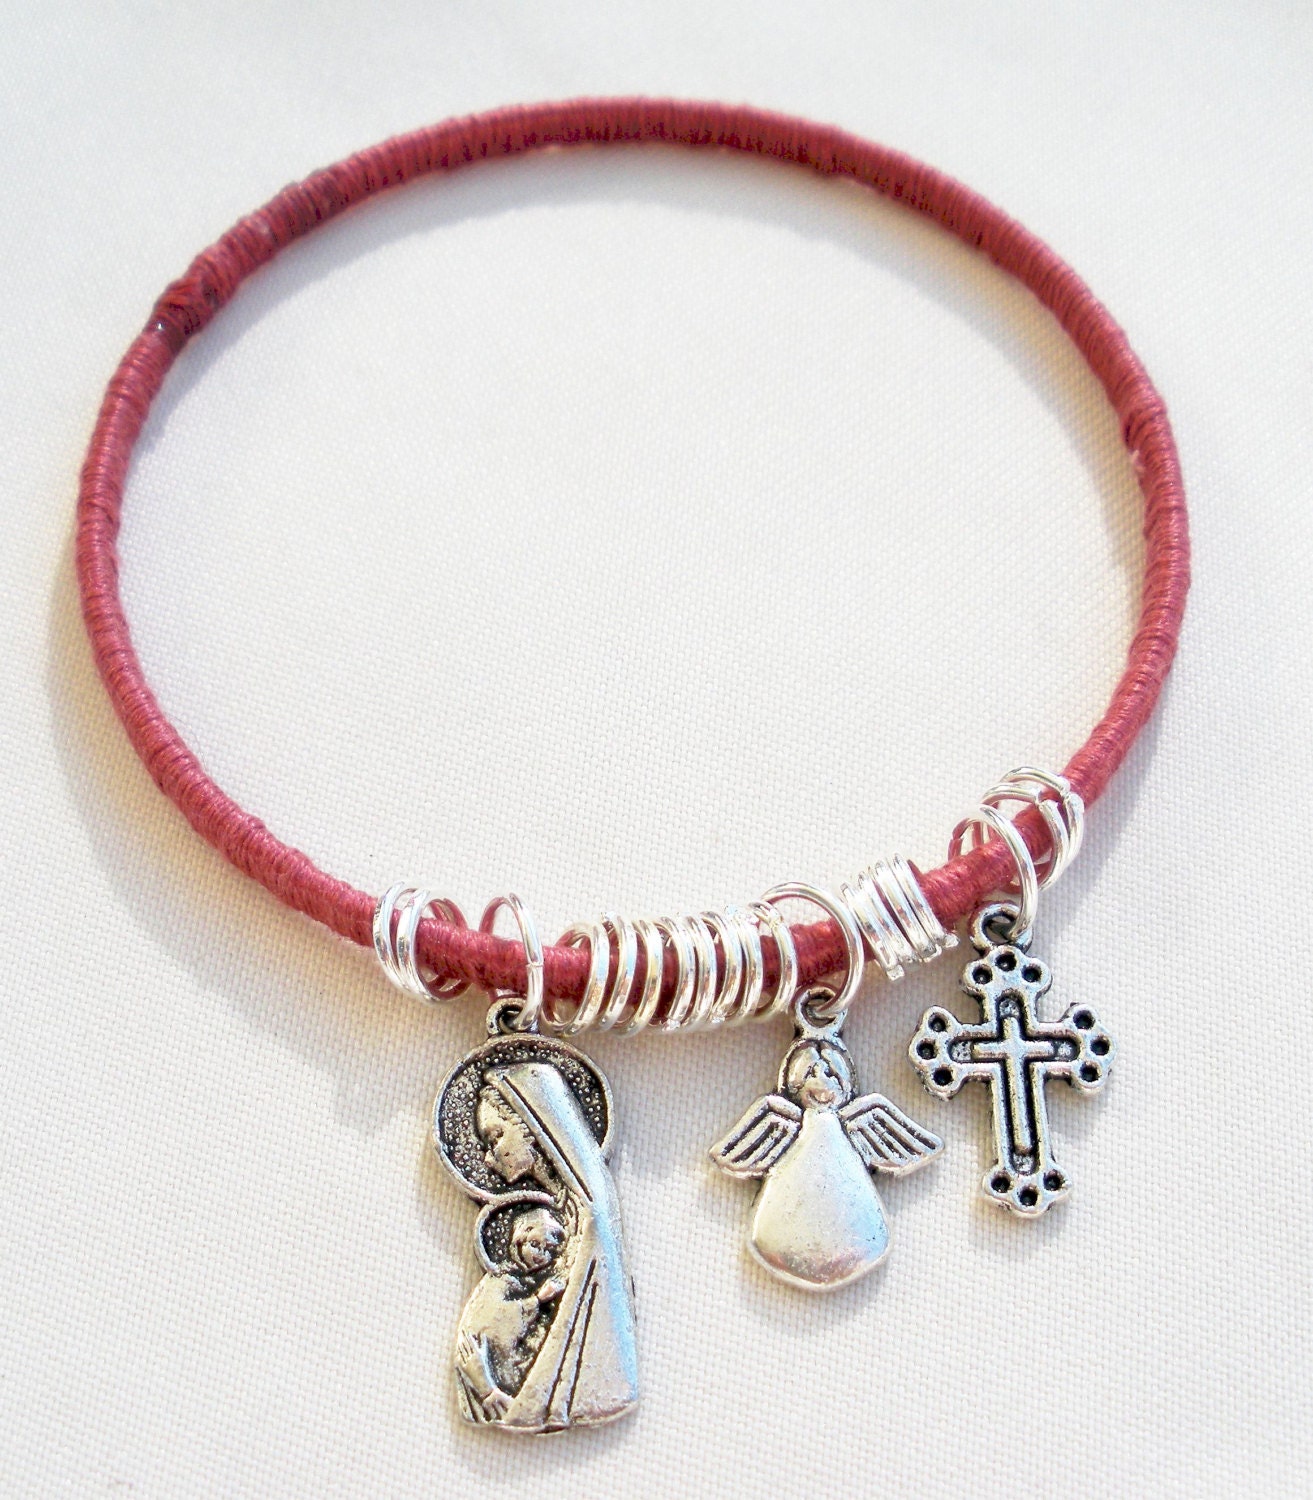 Wrapped pink thread Bangle with mary angel and by TopsailWinds